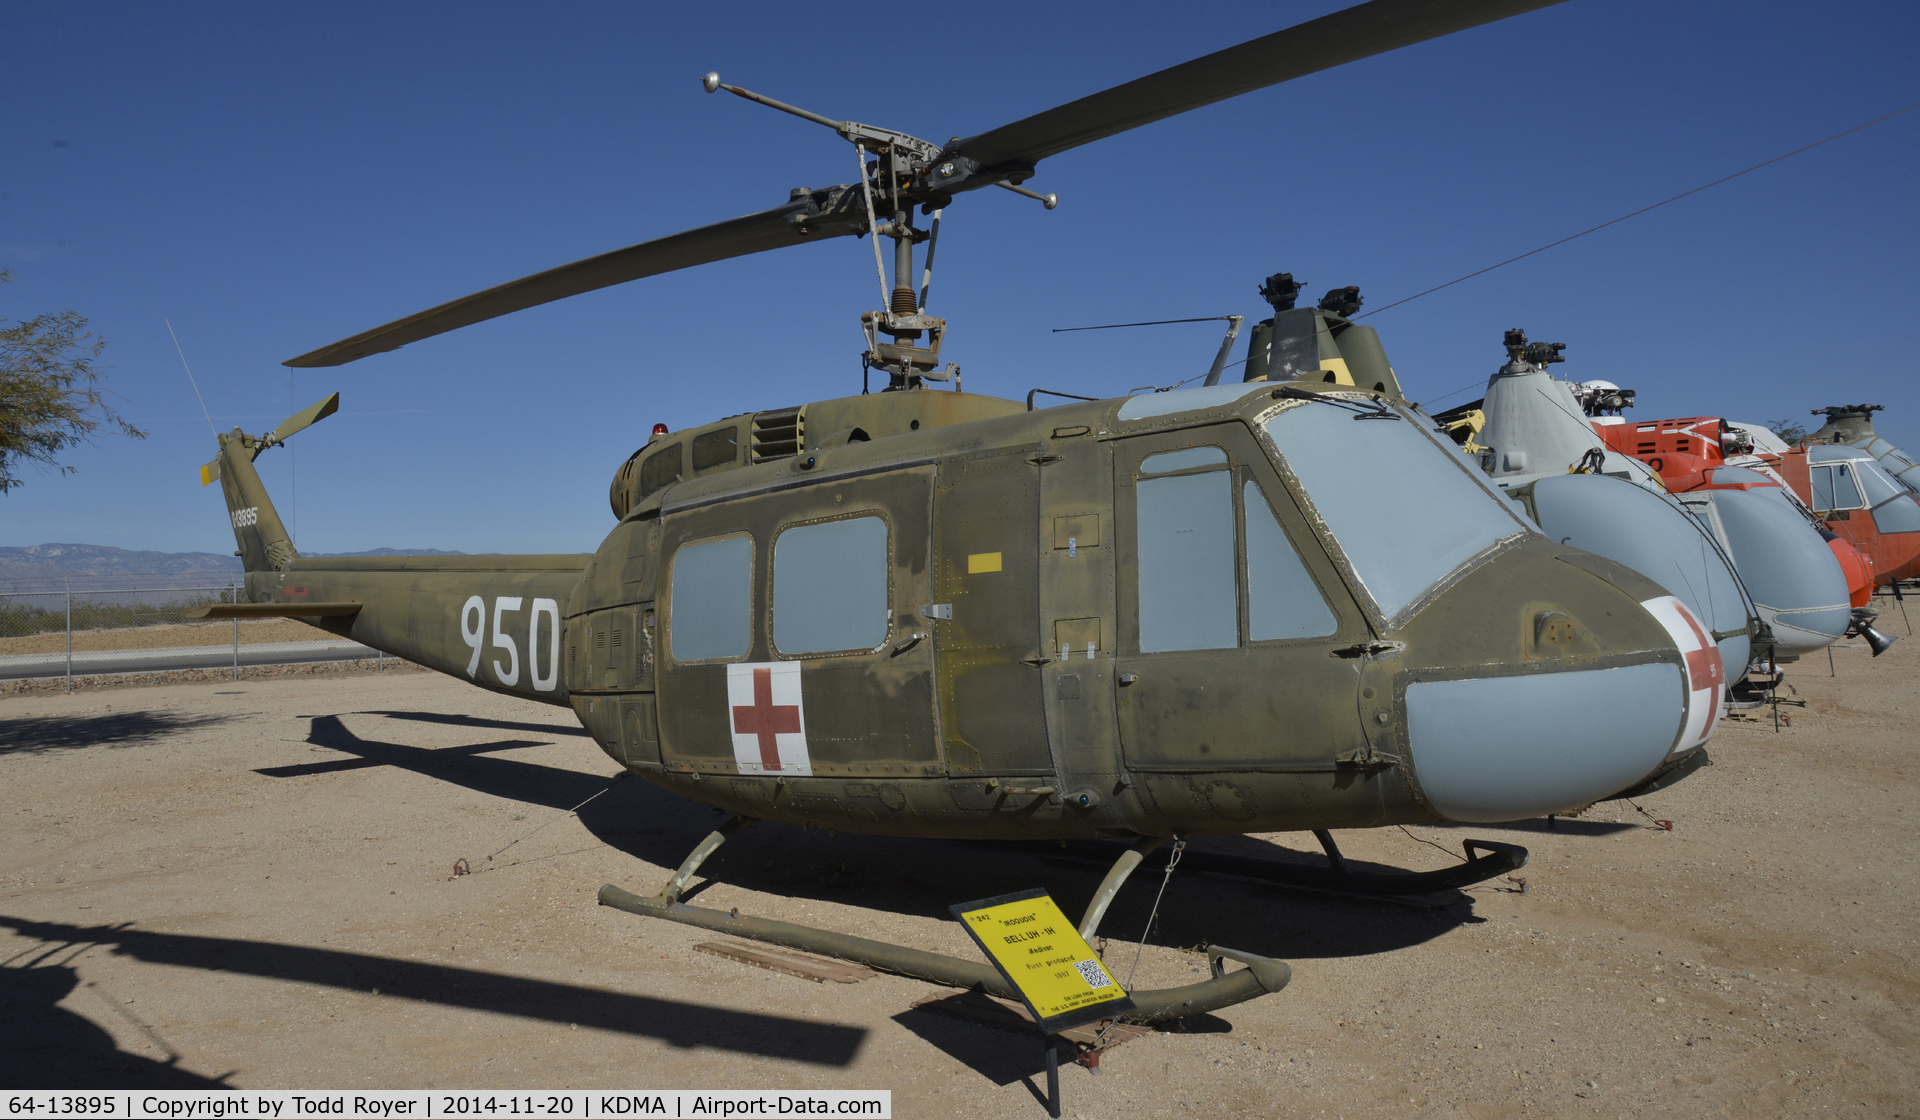 64-13895, 1964 Bell UH-1H Iroquois C/N 4602, On display at the Pima Air and Space Museum